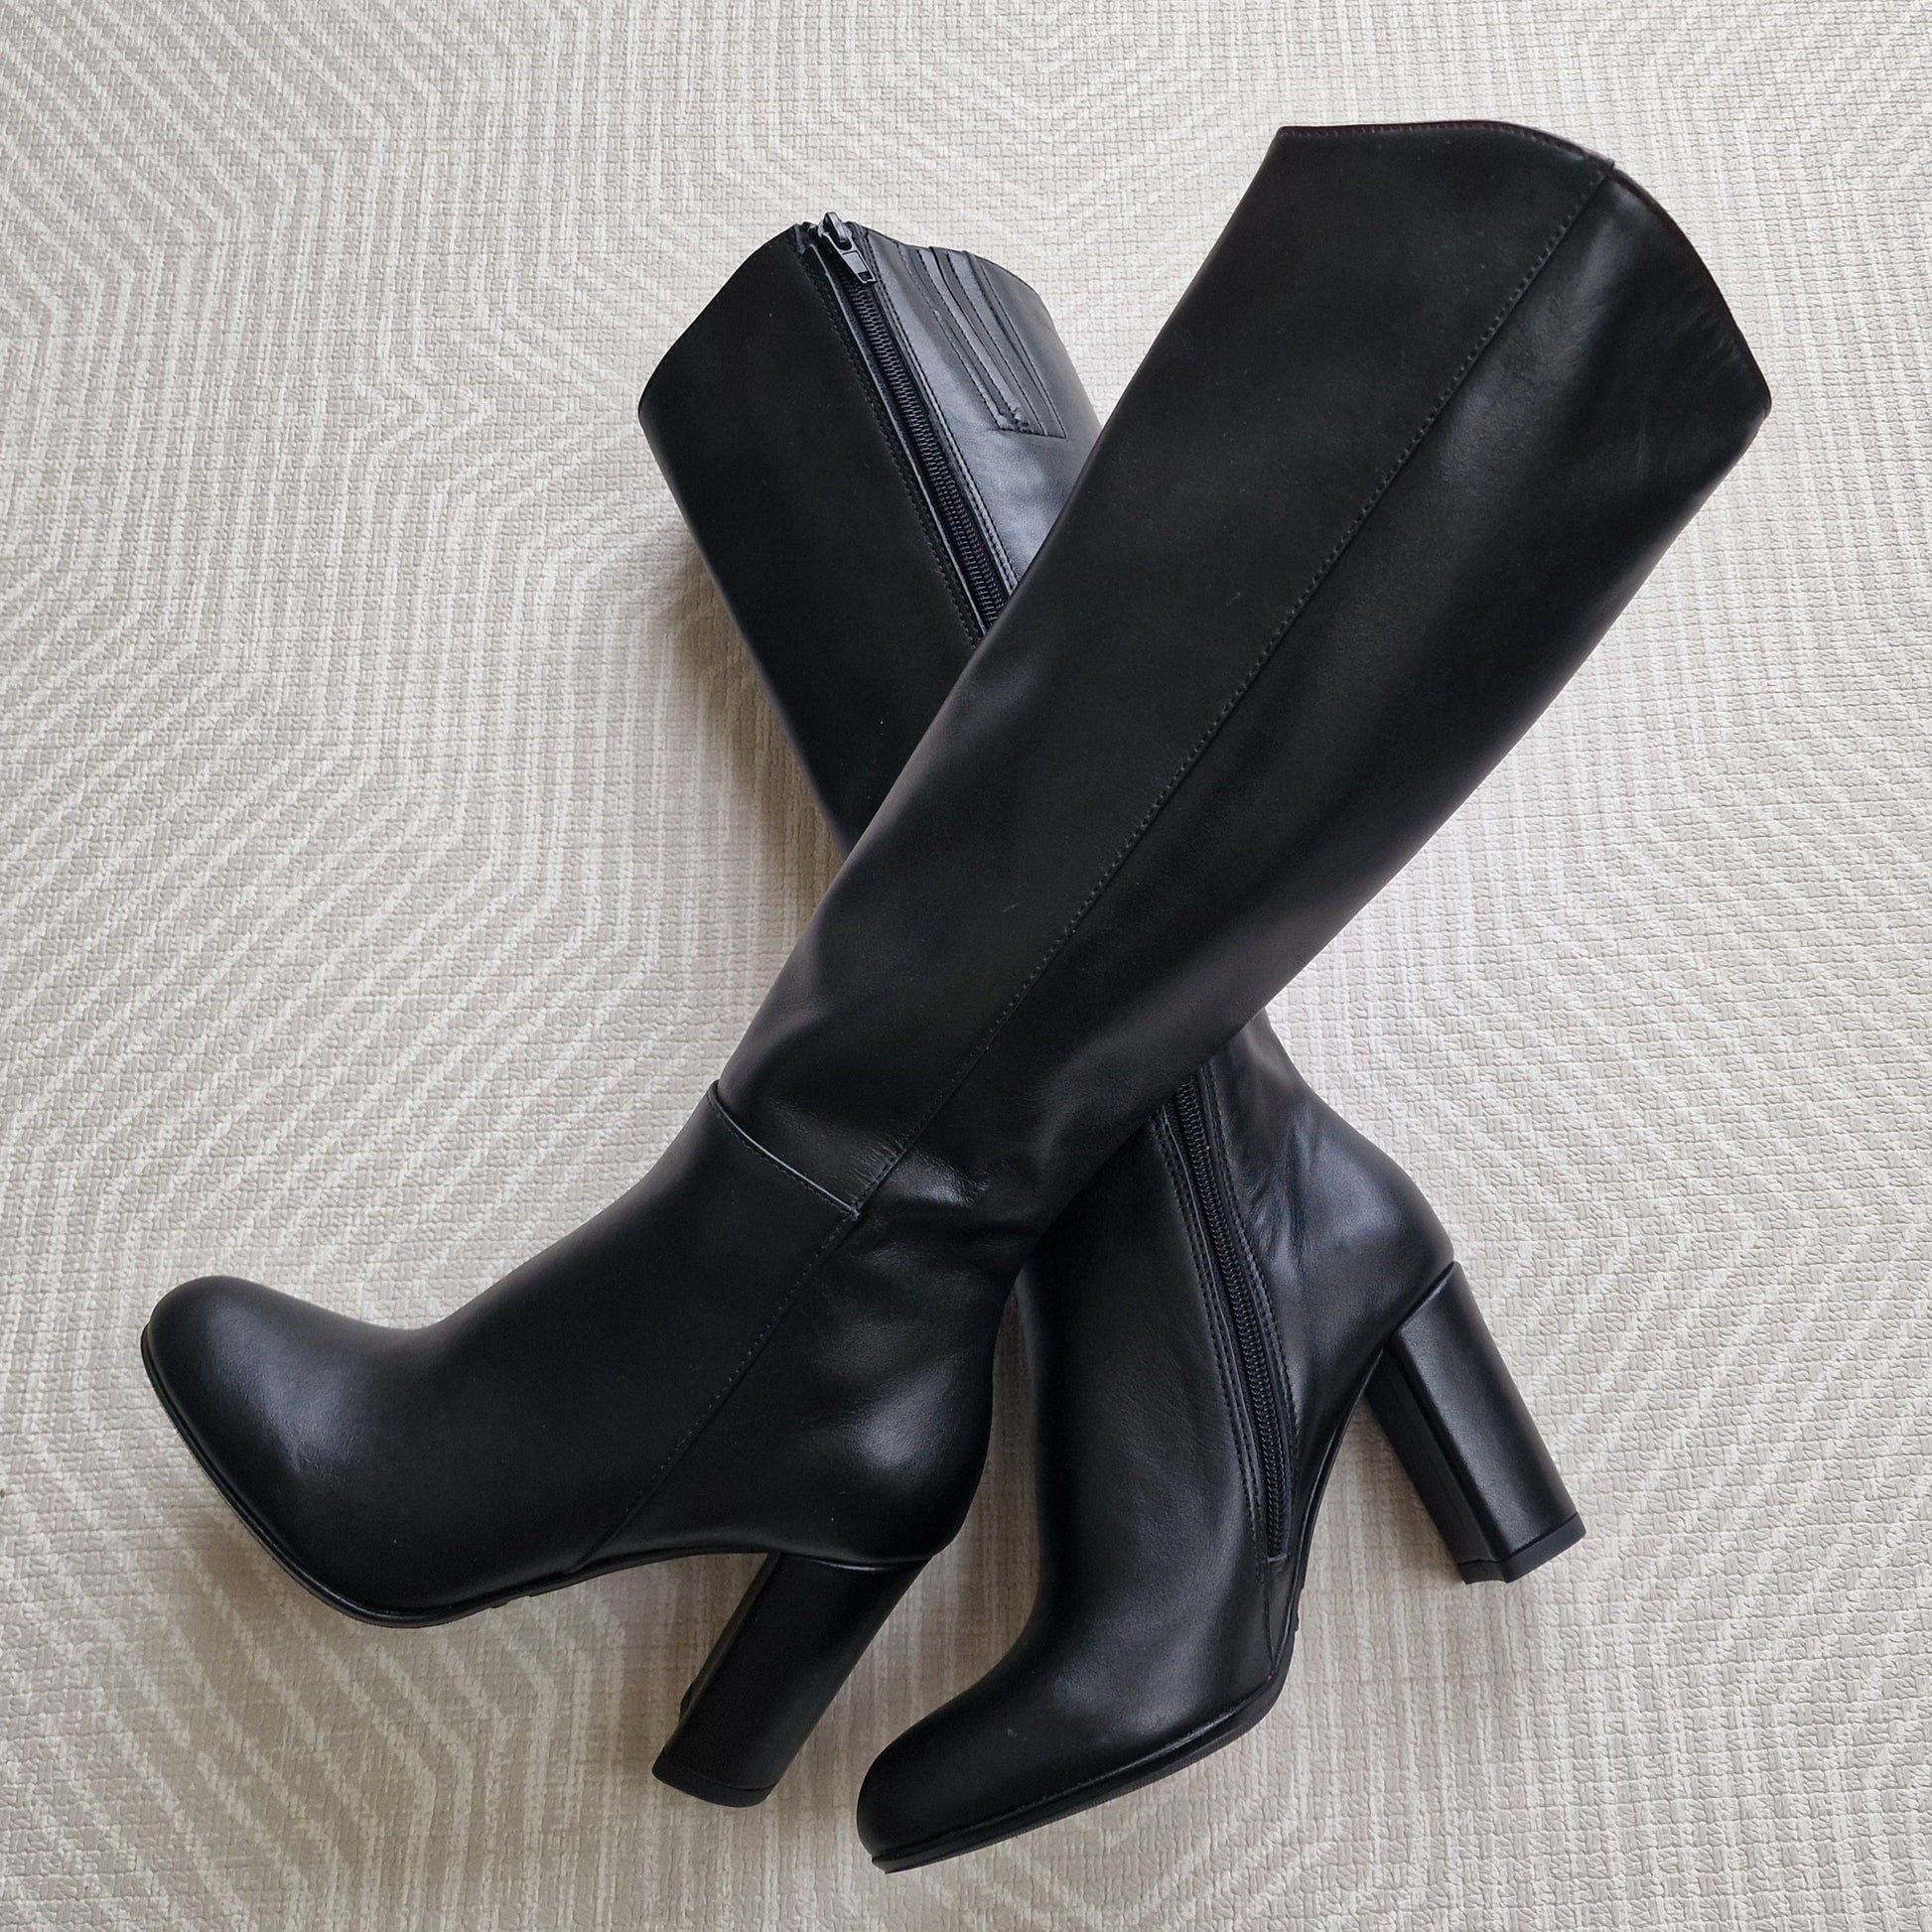 Knee-high black leather boots set on a high block heel. 